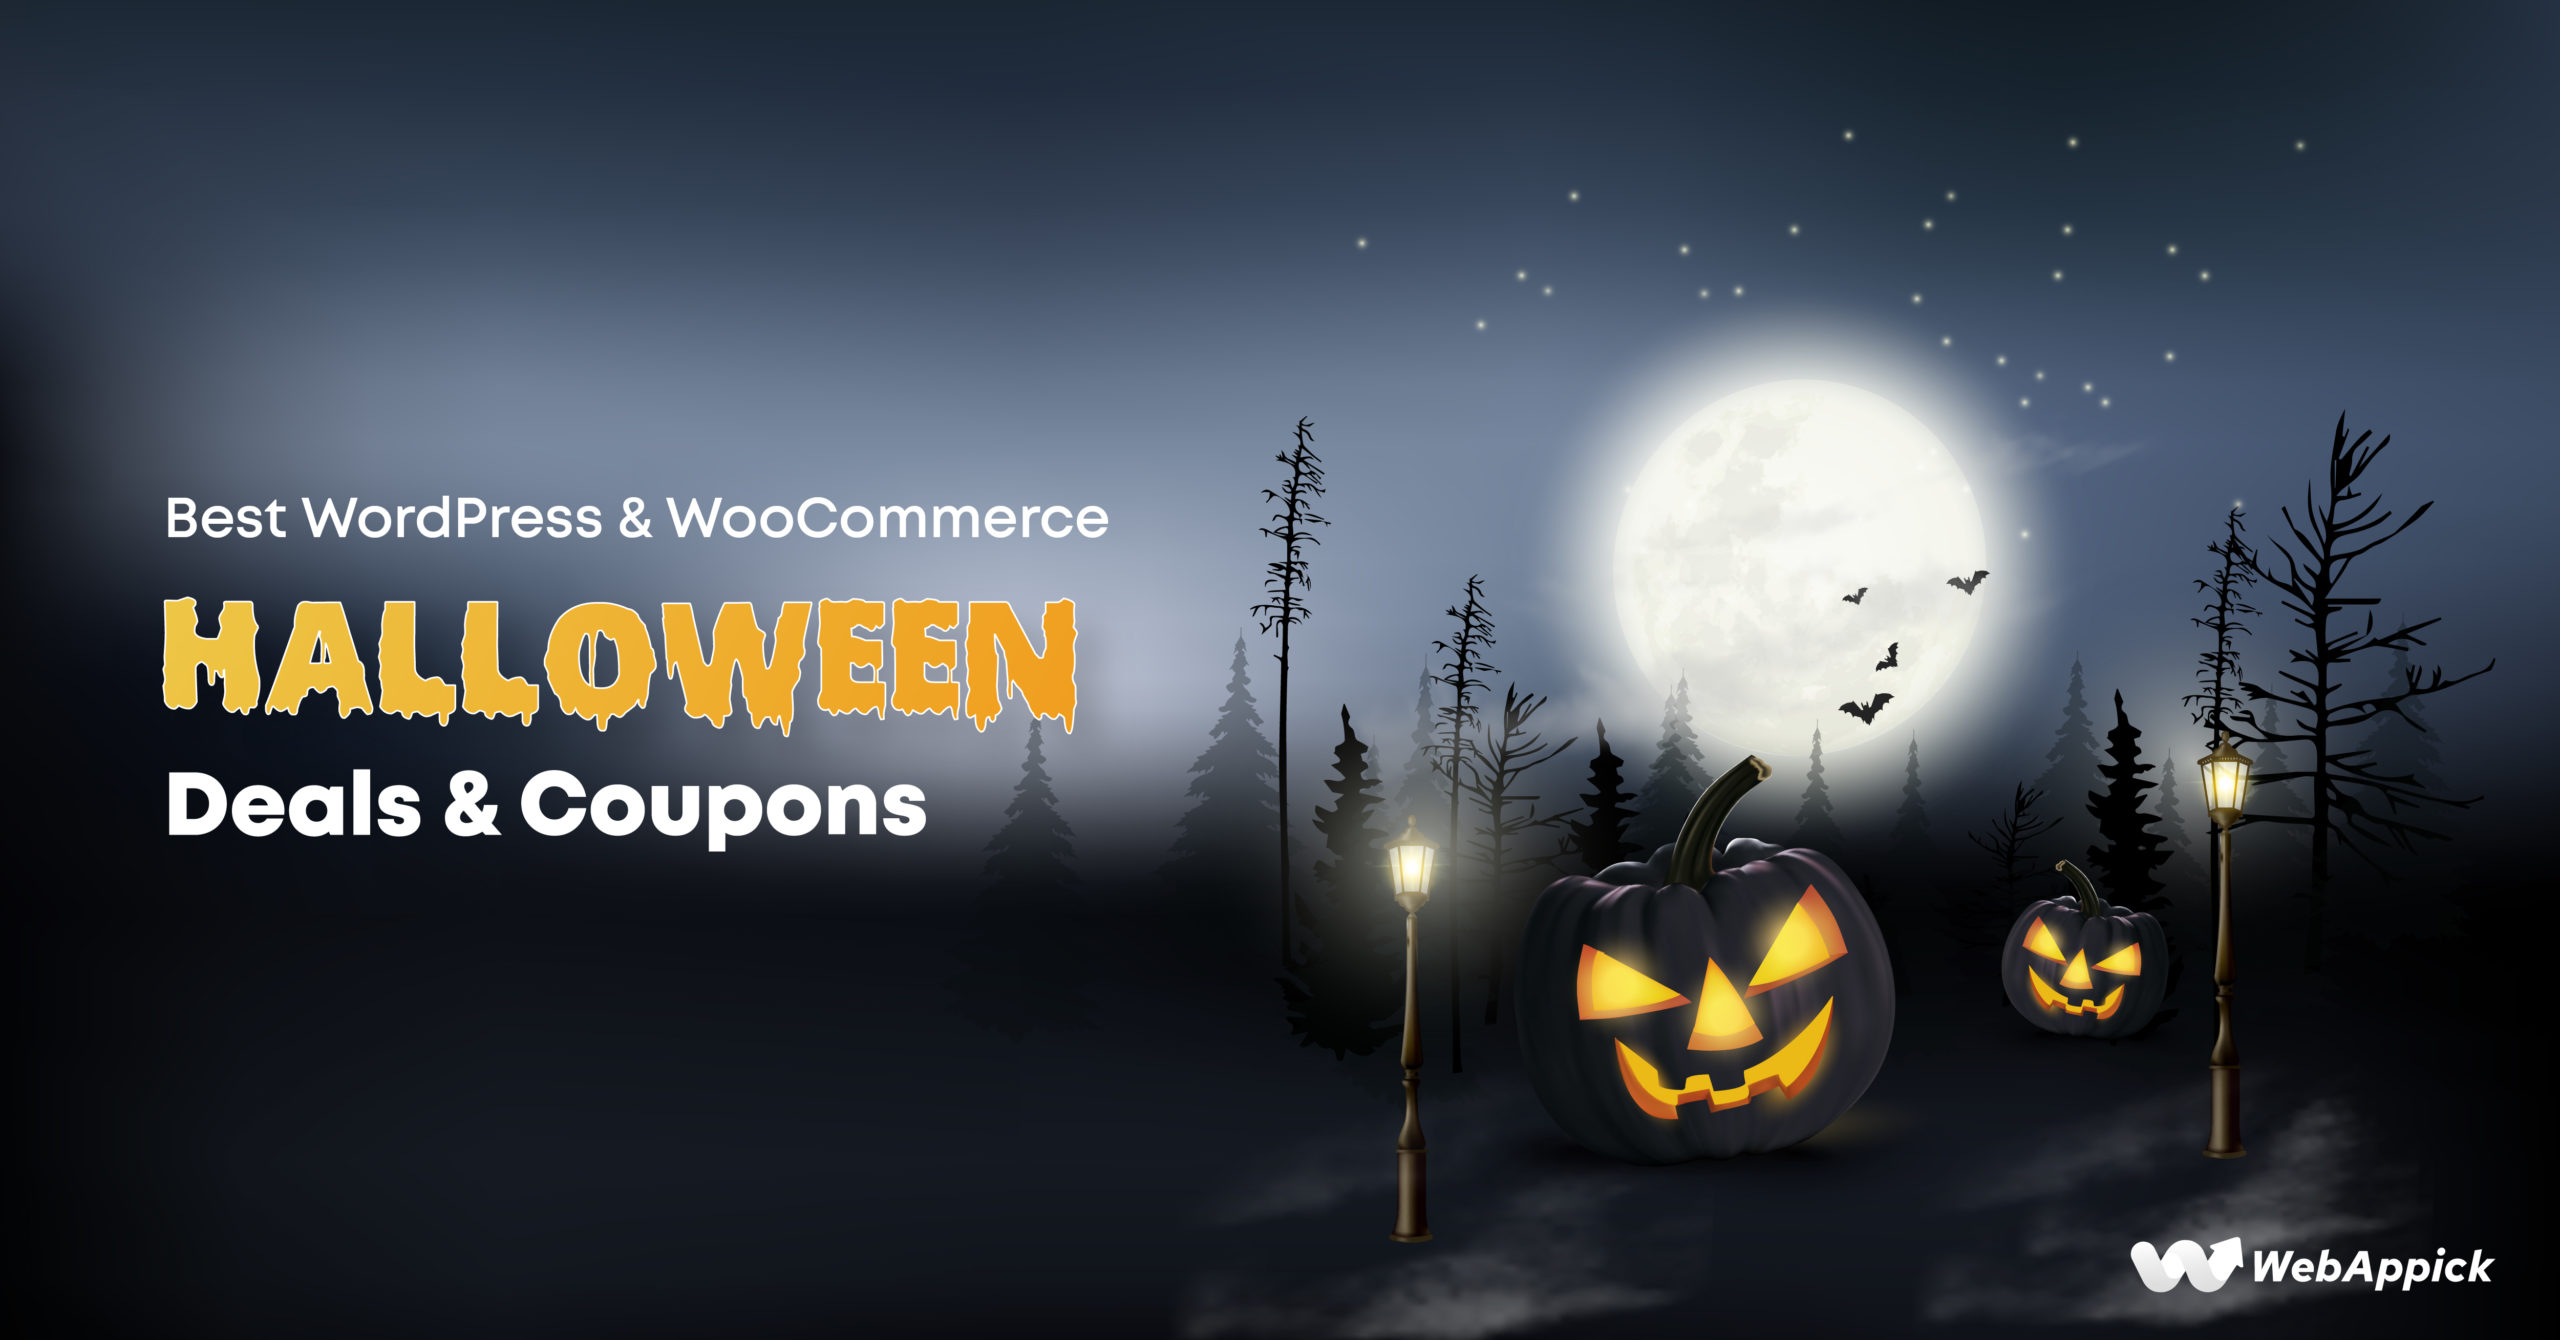 35 Catchy Promo Code Names For Holidays (WooCommerce Guide)